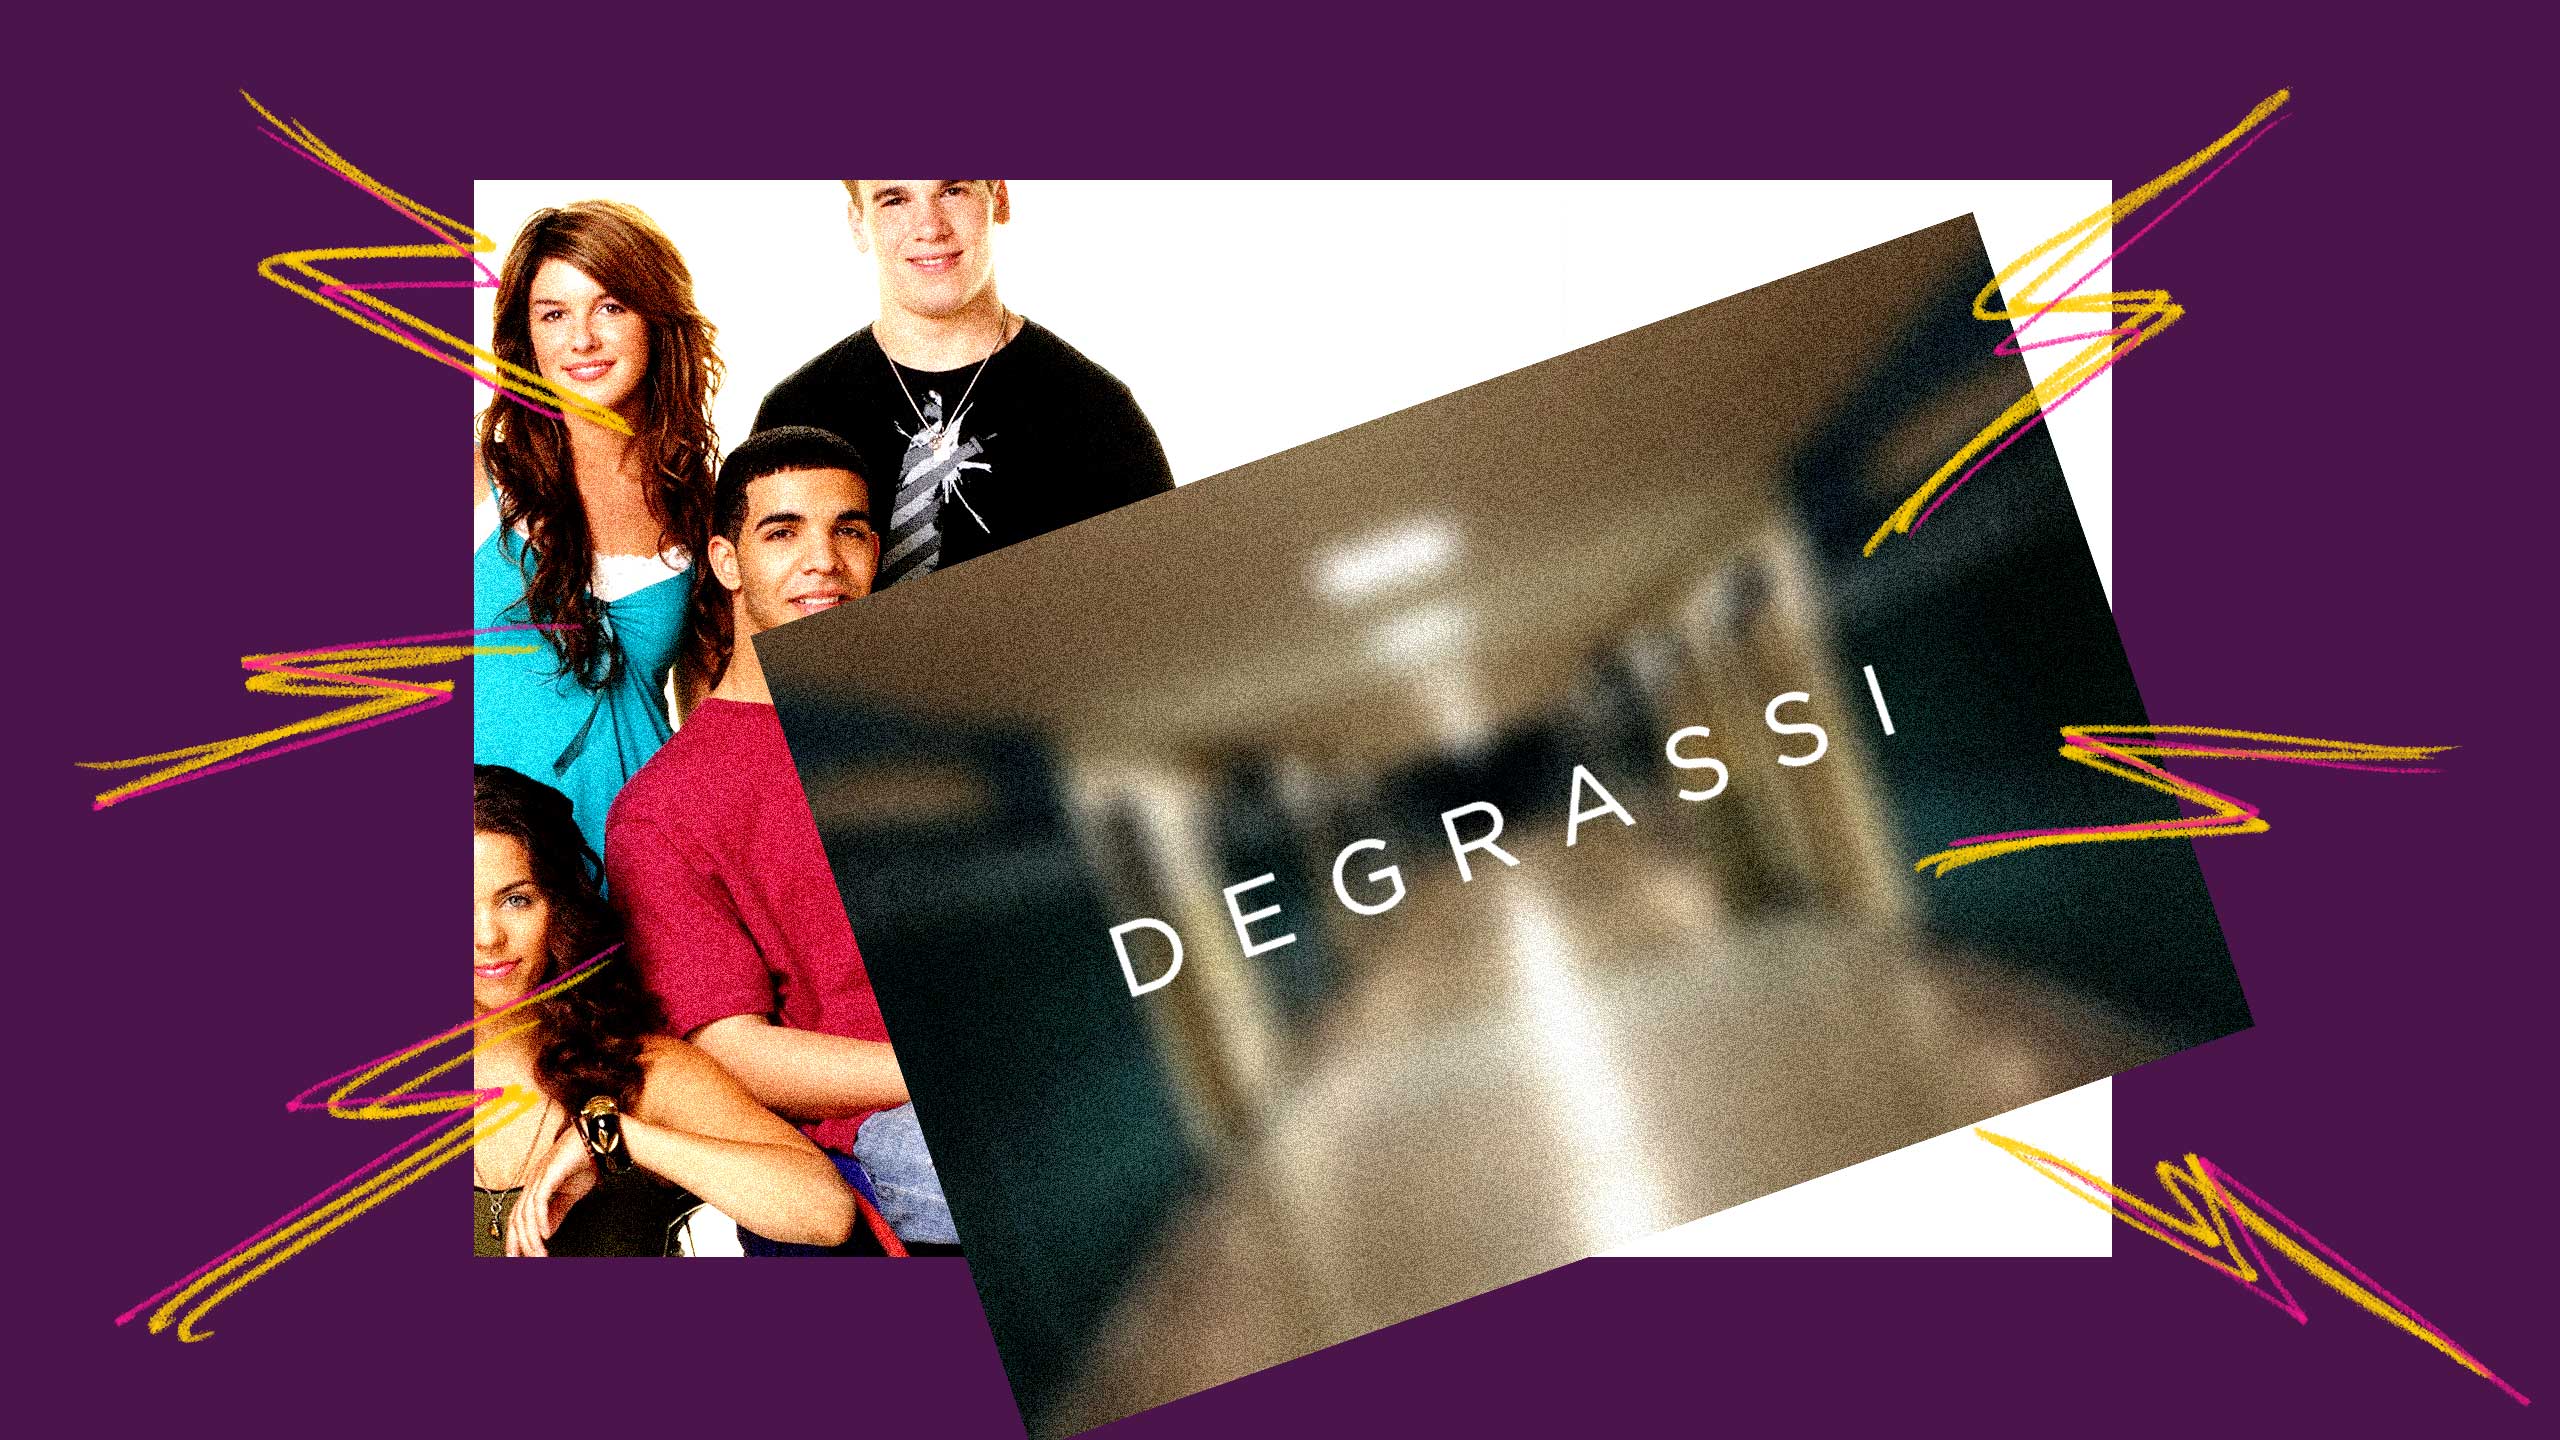 The next class of students arrives in 2023. A new Degrassi series